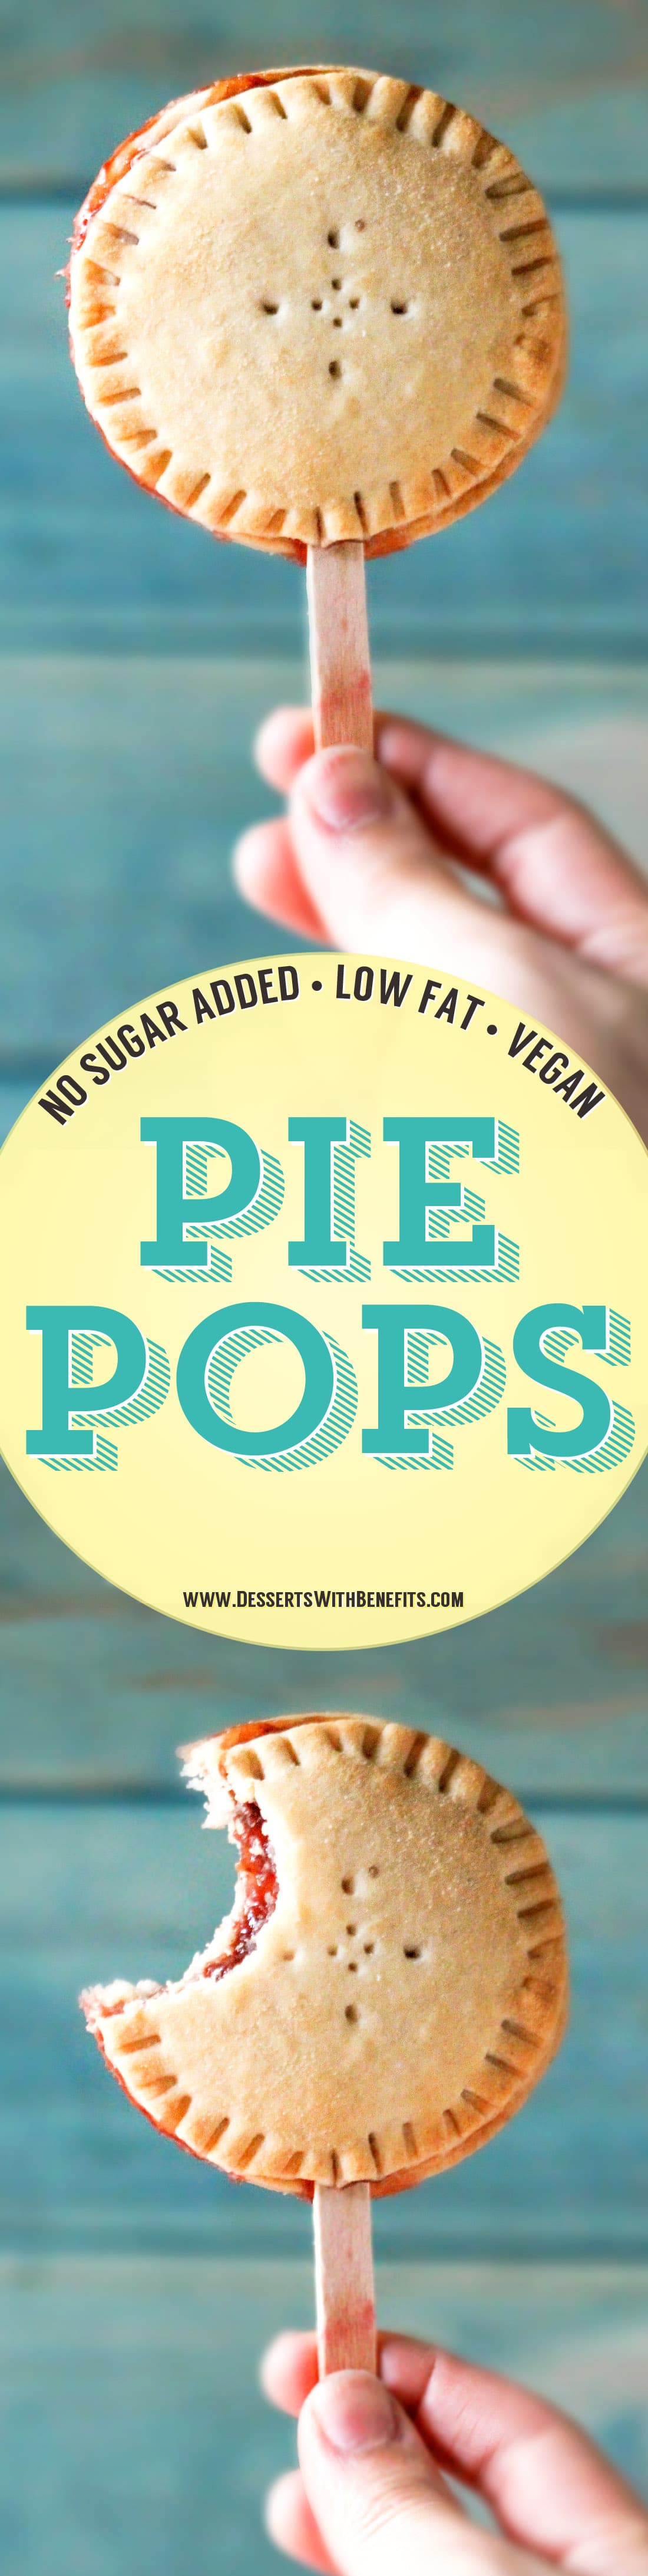 If you like pie but don't like sharing, then these Pie Pops are for YOU! You can make whatever flavor you like — strawberry to blueberry to apple to cranberry and more. These are a guaranteed crowdpleaser and no one could tell they’re totally guilt-free, low sugar, and vegan! Healthy Dessert Recipes at the Desserts With Benefits Blog (www.DessertsWithBenefits.com)